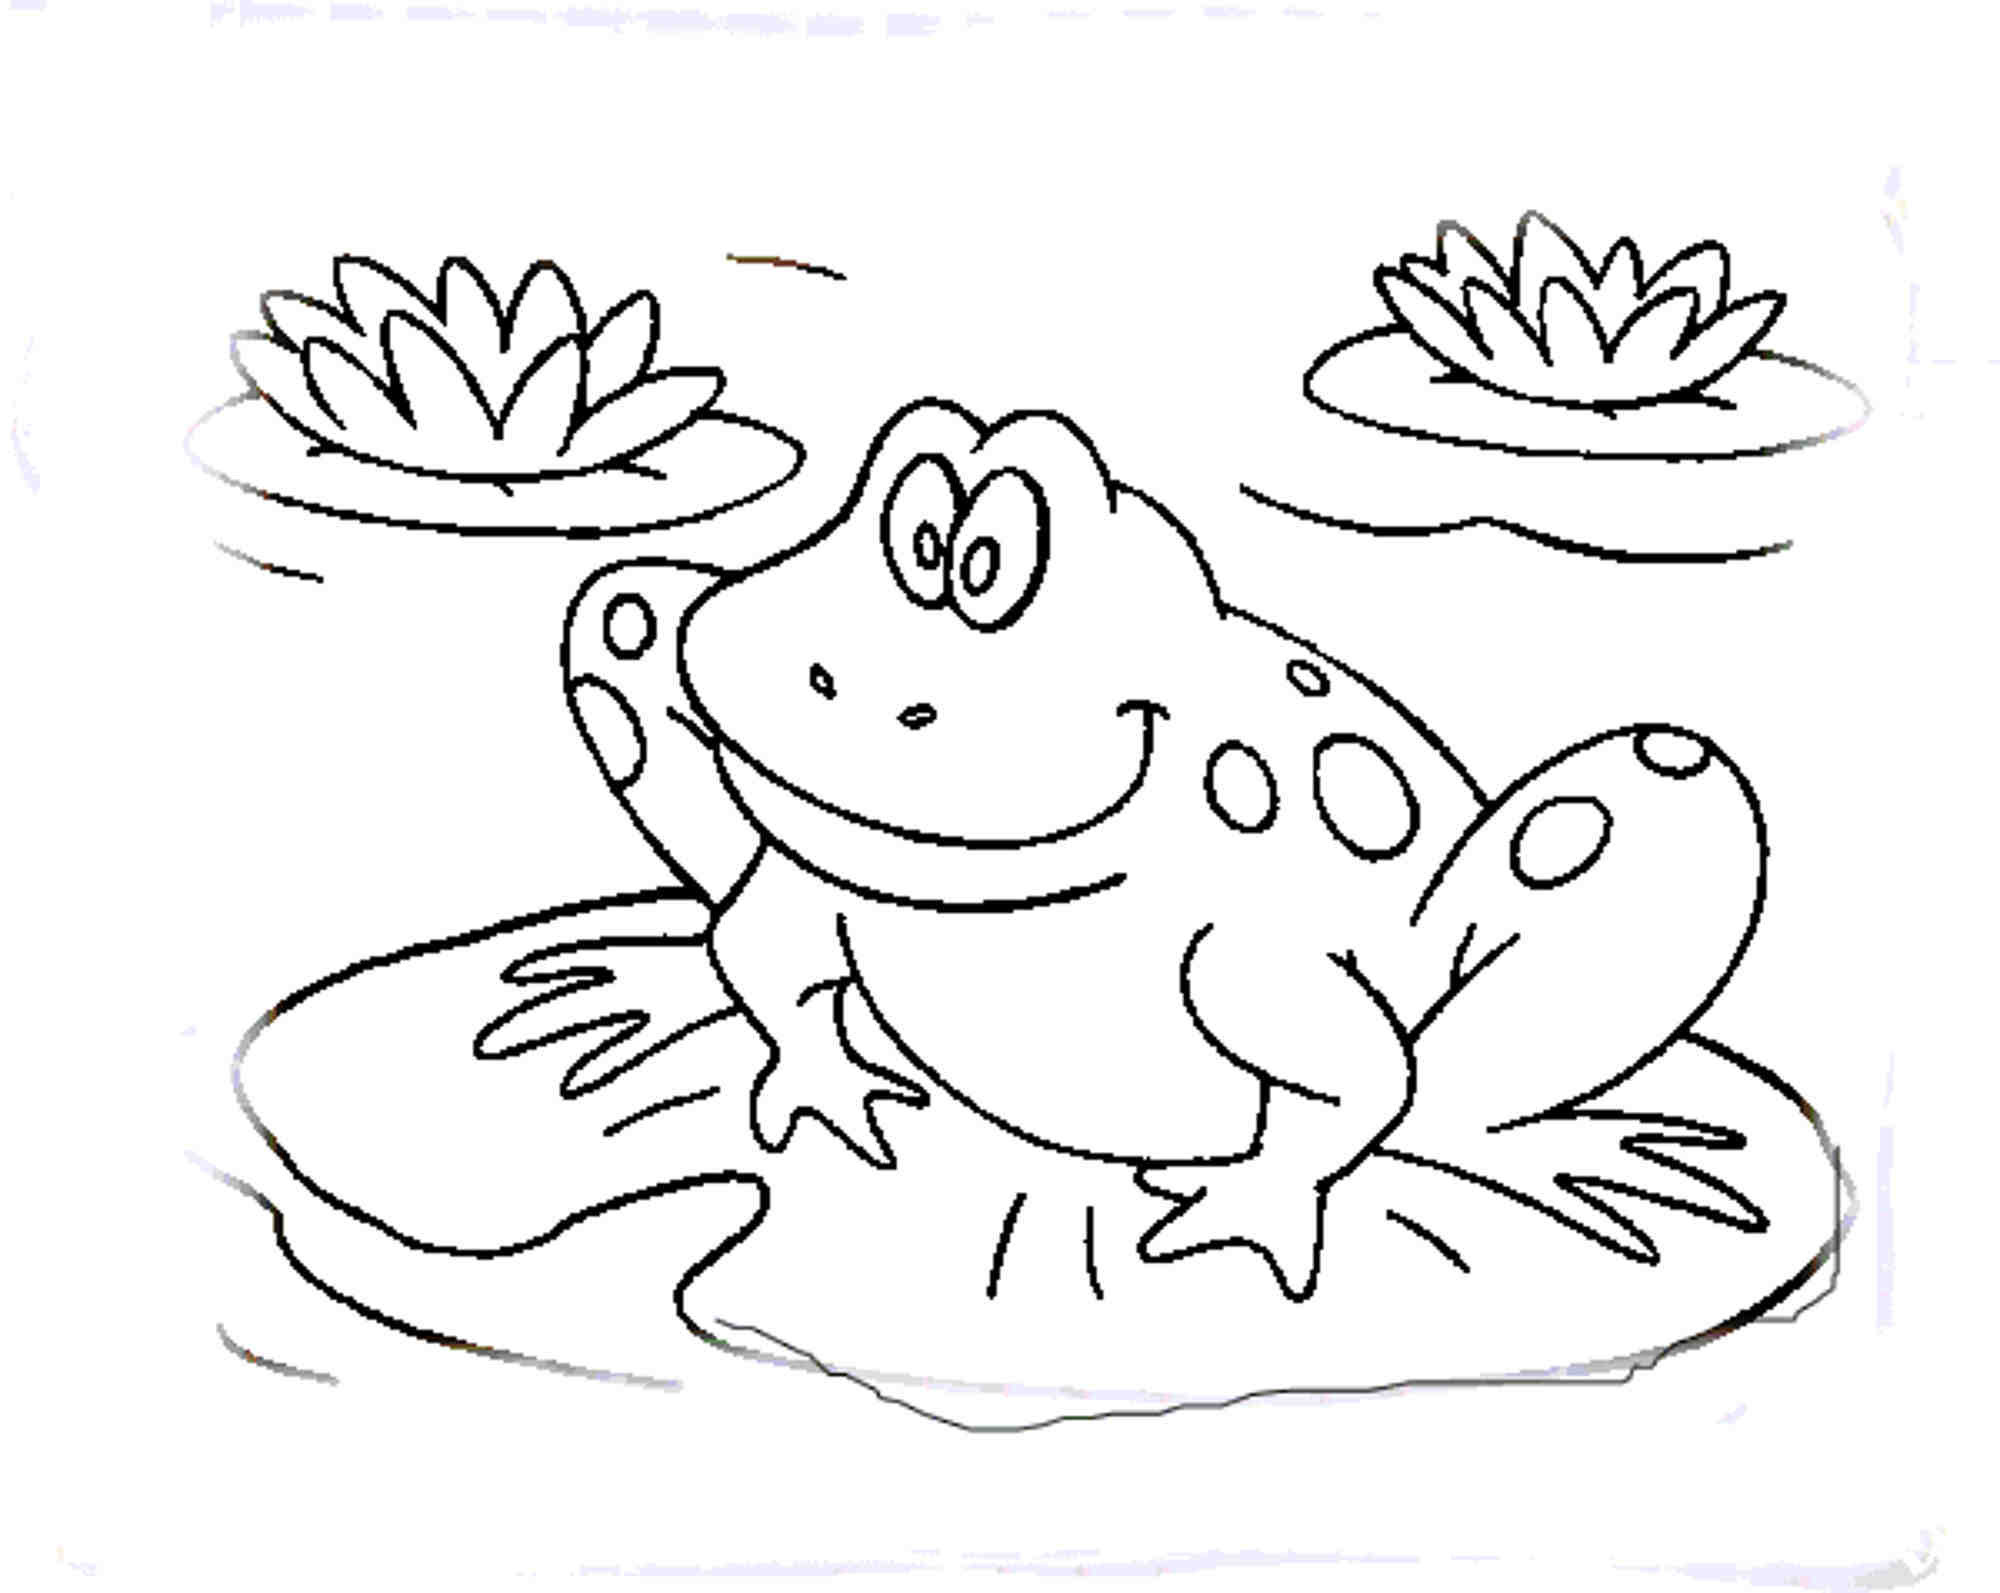 Frog Coloring Pages For Kids
 Print & Download Frog Coloring Pages Theme for Kids